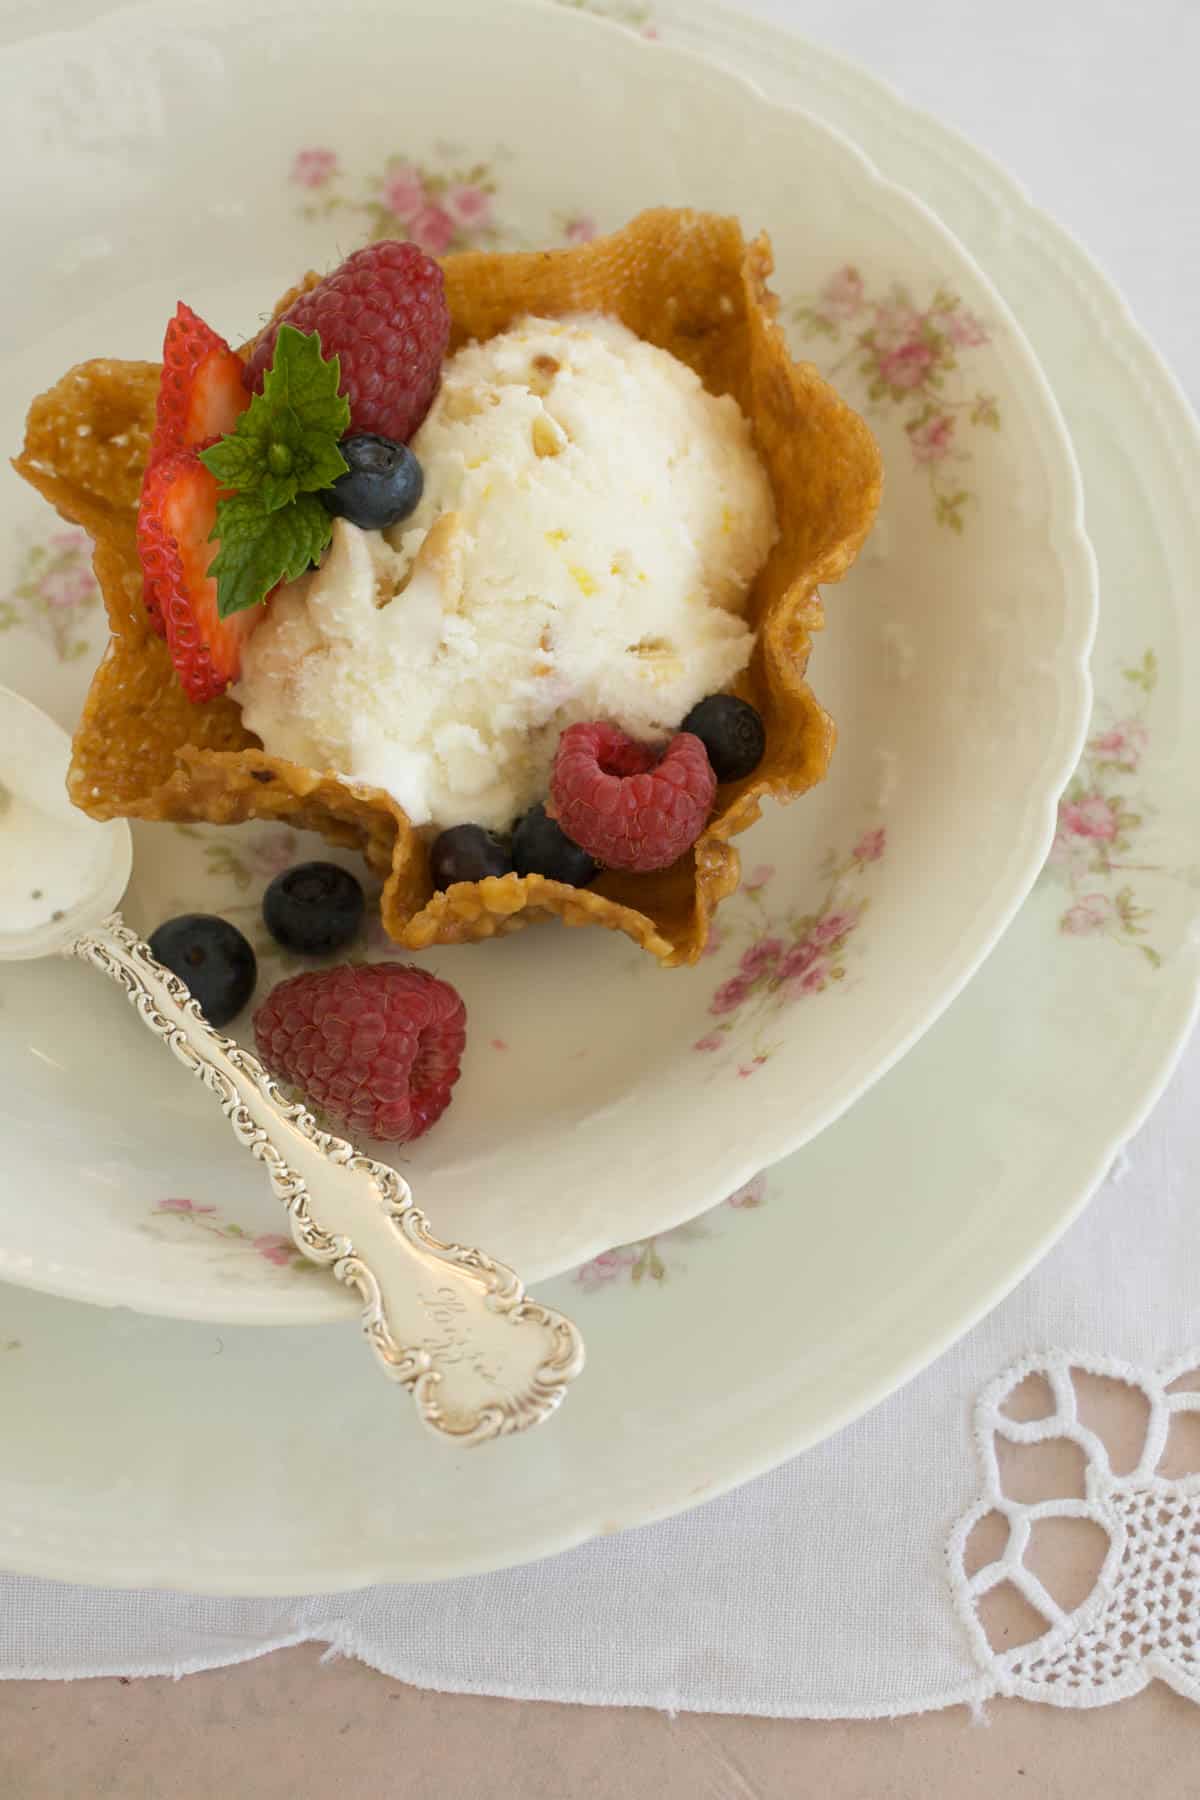 Pecan Cookie Cup with a scoop of Lemon Almond Ice Cream with berries